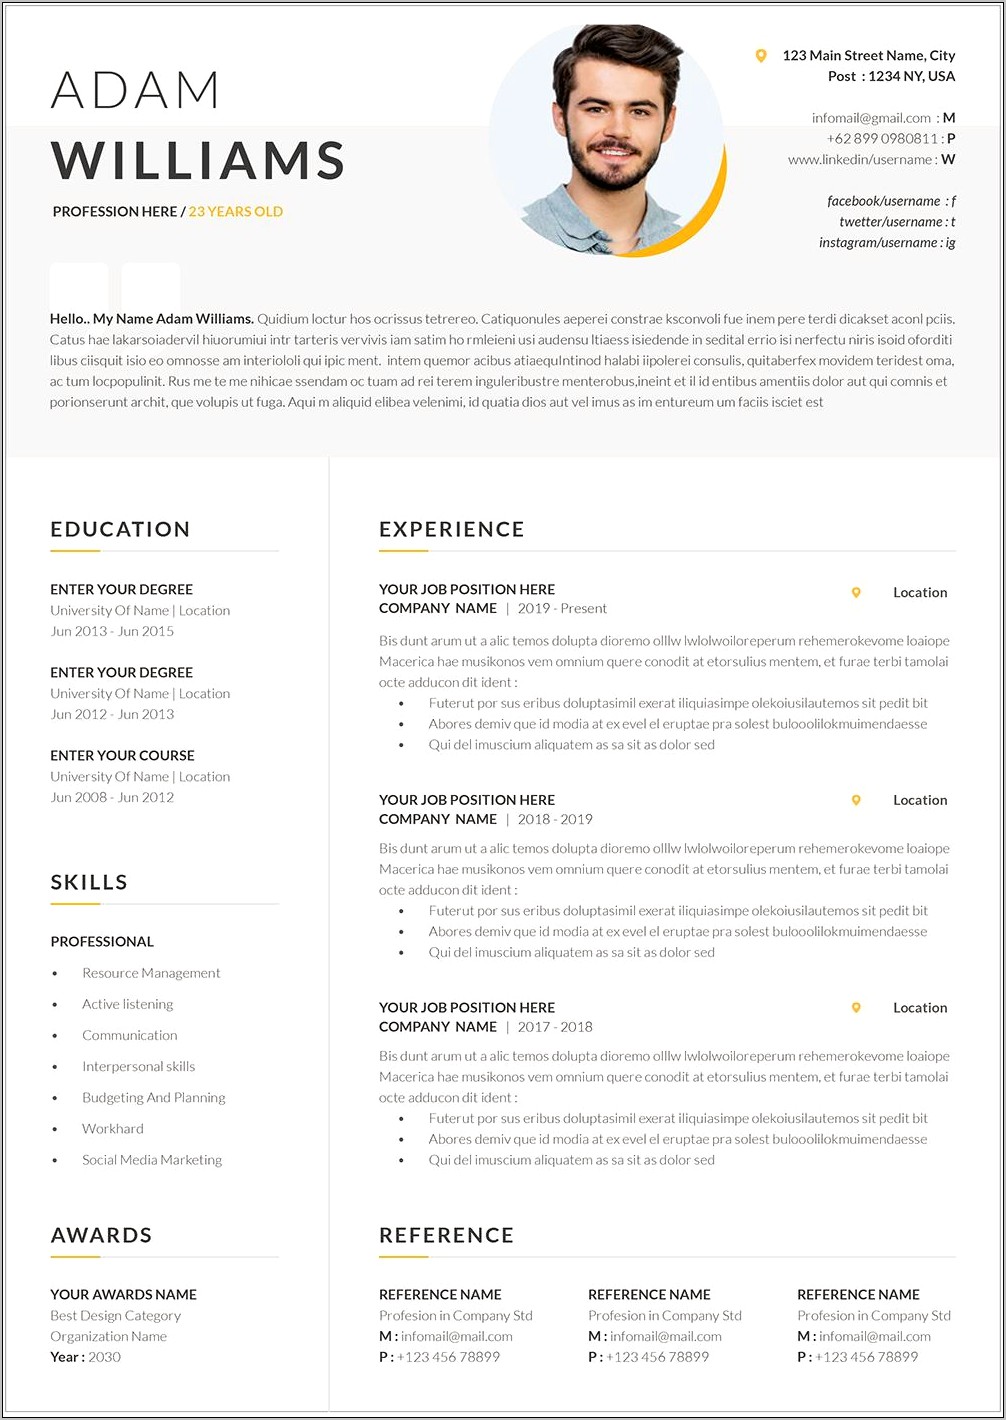 Best Resume Templates For Innovative Professionals